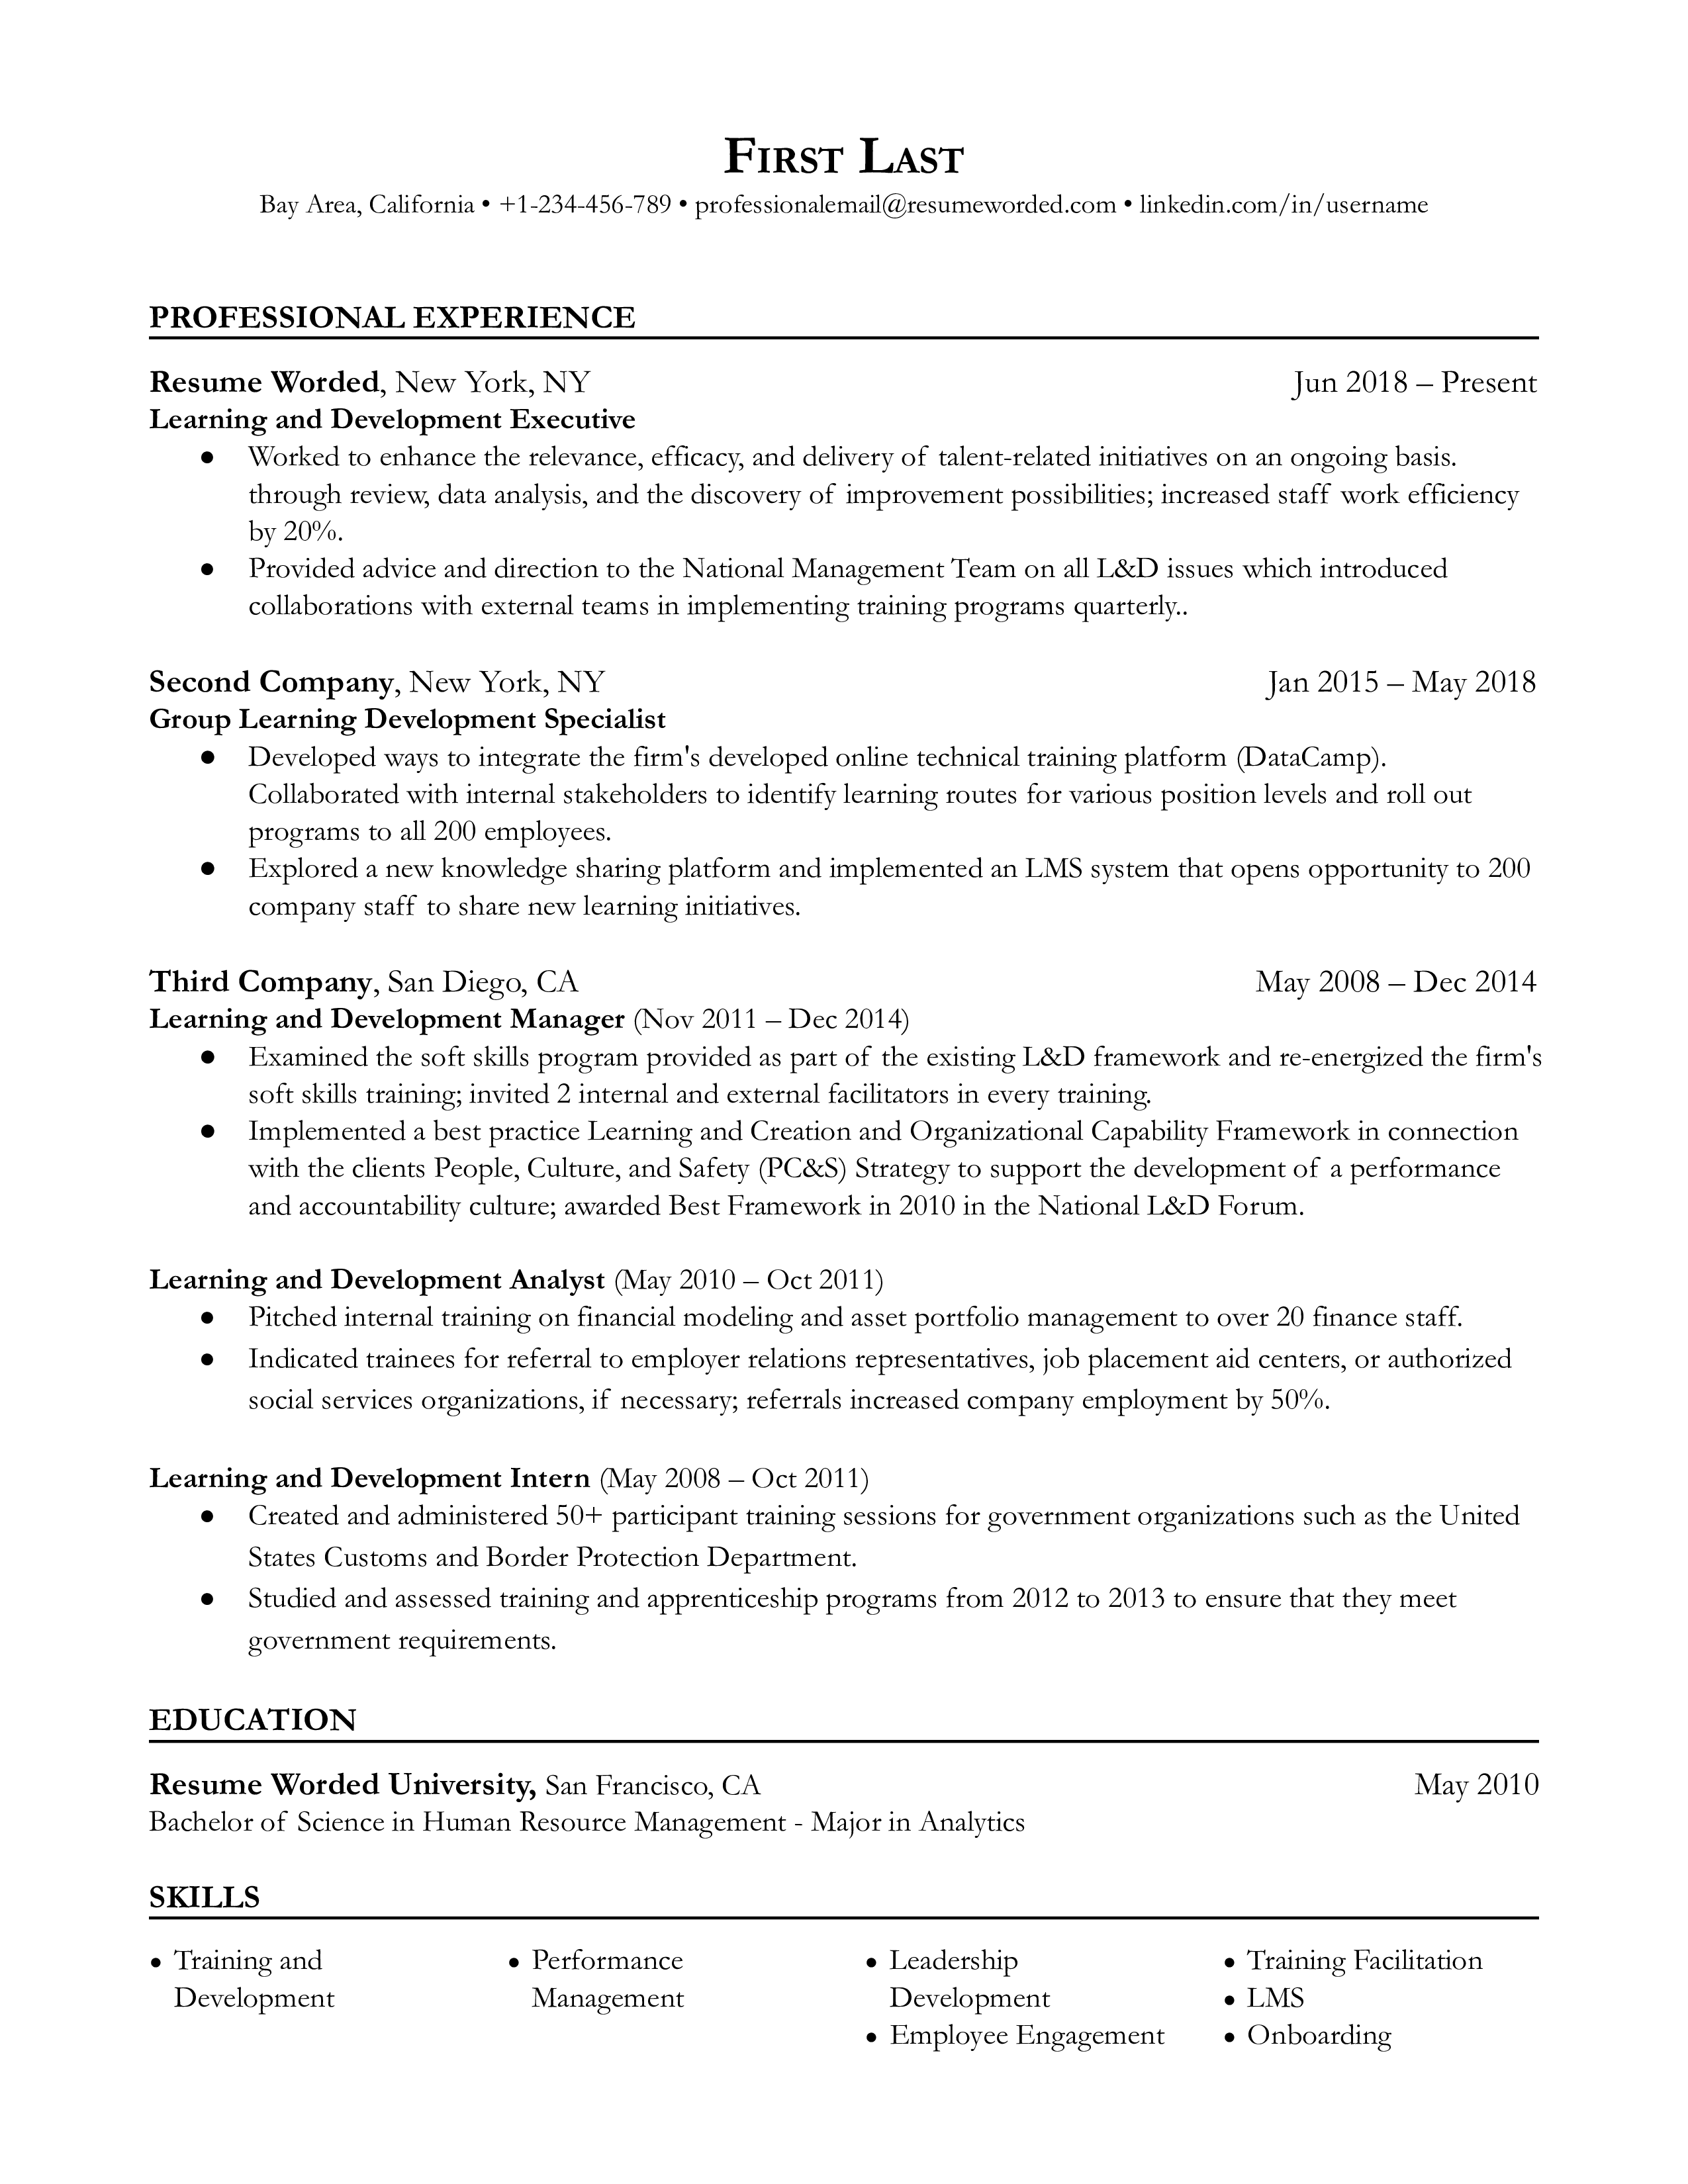 Learning and Development Executive Resume Sample